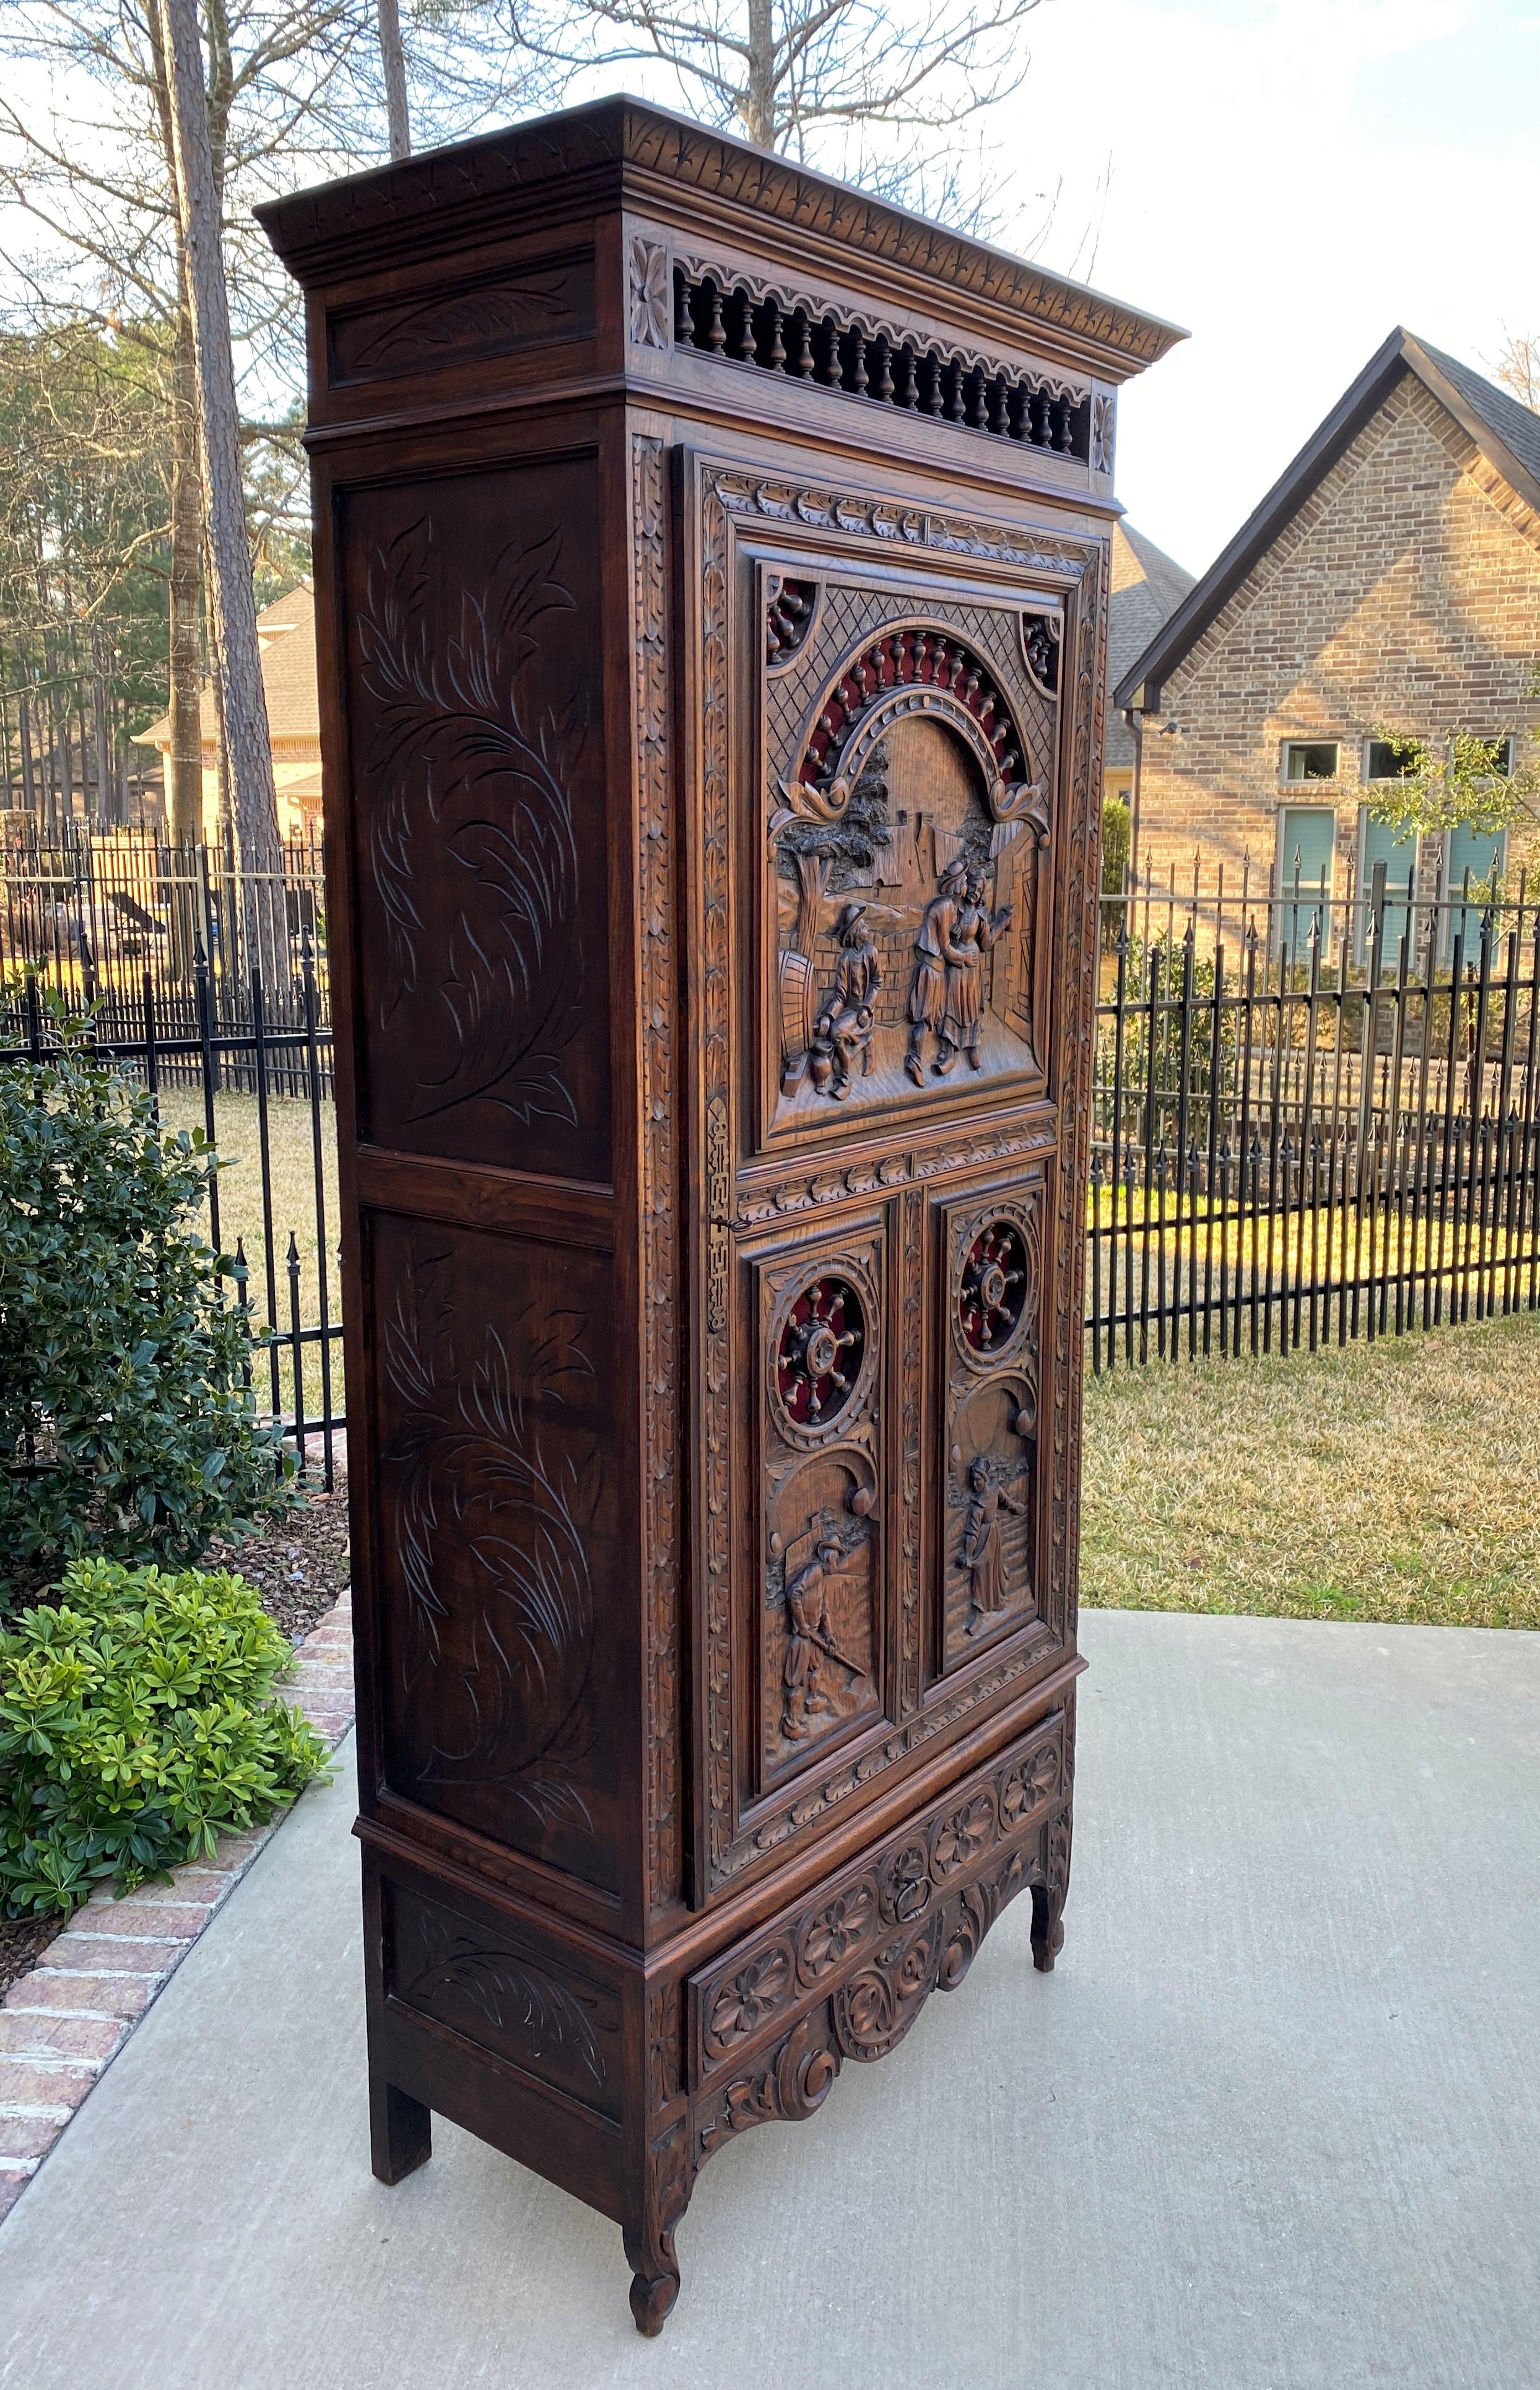 Beautiful 19th century antique French oak Breton Brittany cabinet, Bonnetiere, armoire, or wardrobe with interior shelves ~~Tall~~c. 1880s

Charming carved oak cabinet or 